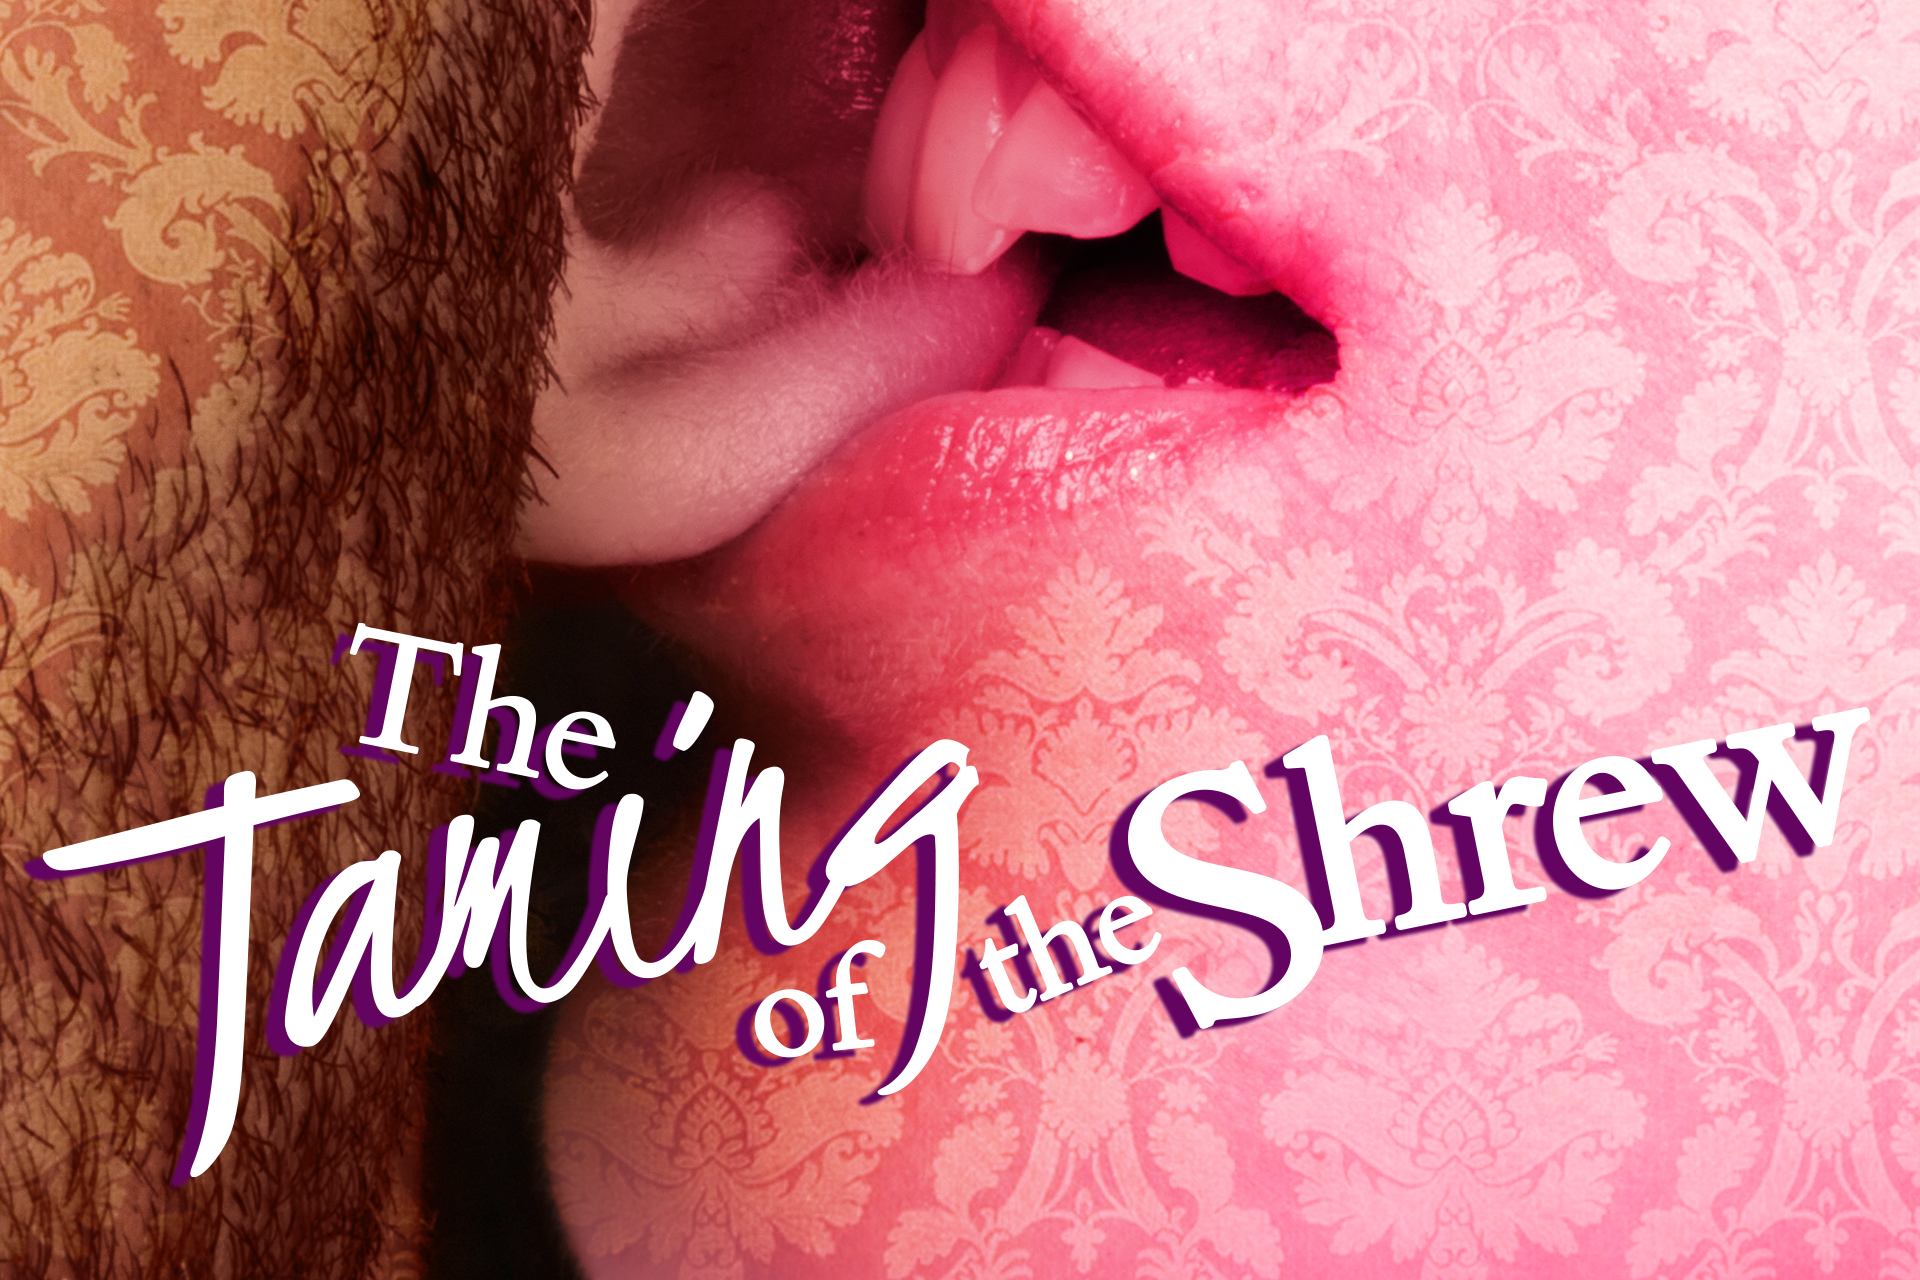 The Taming of the Shew artwork